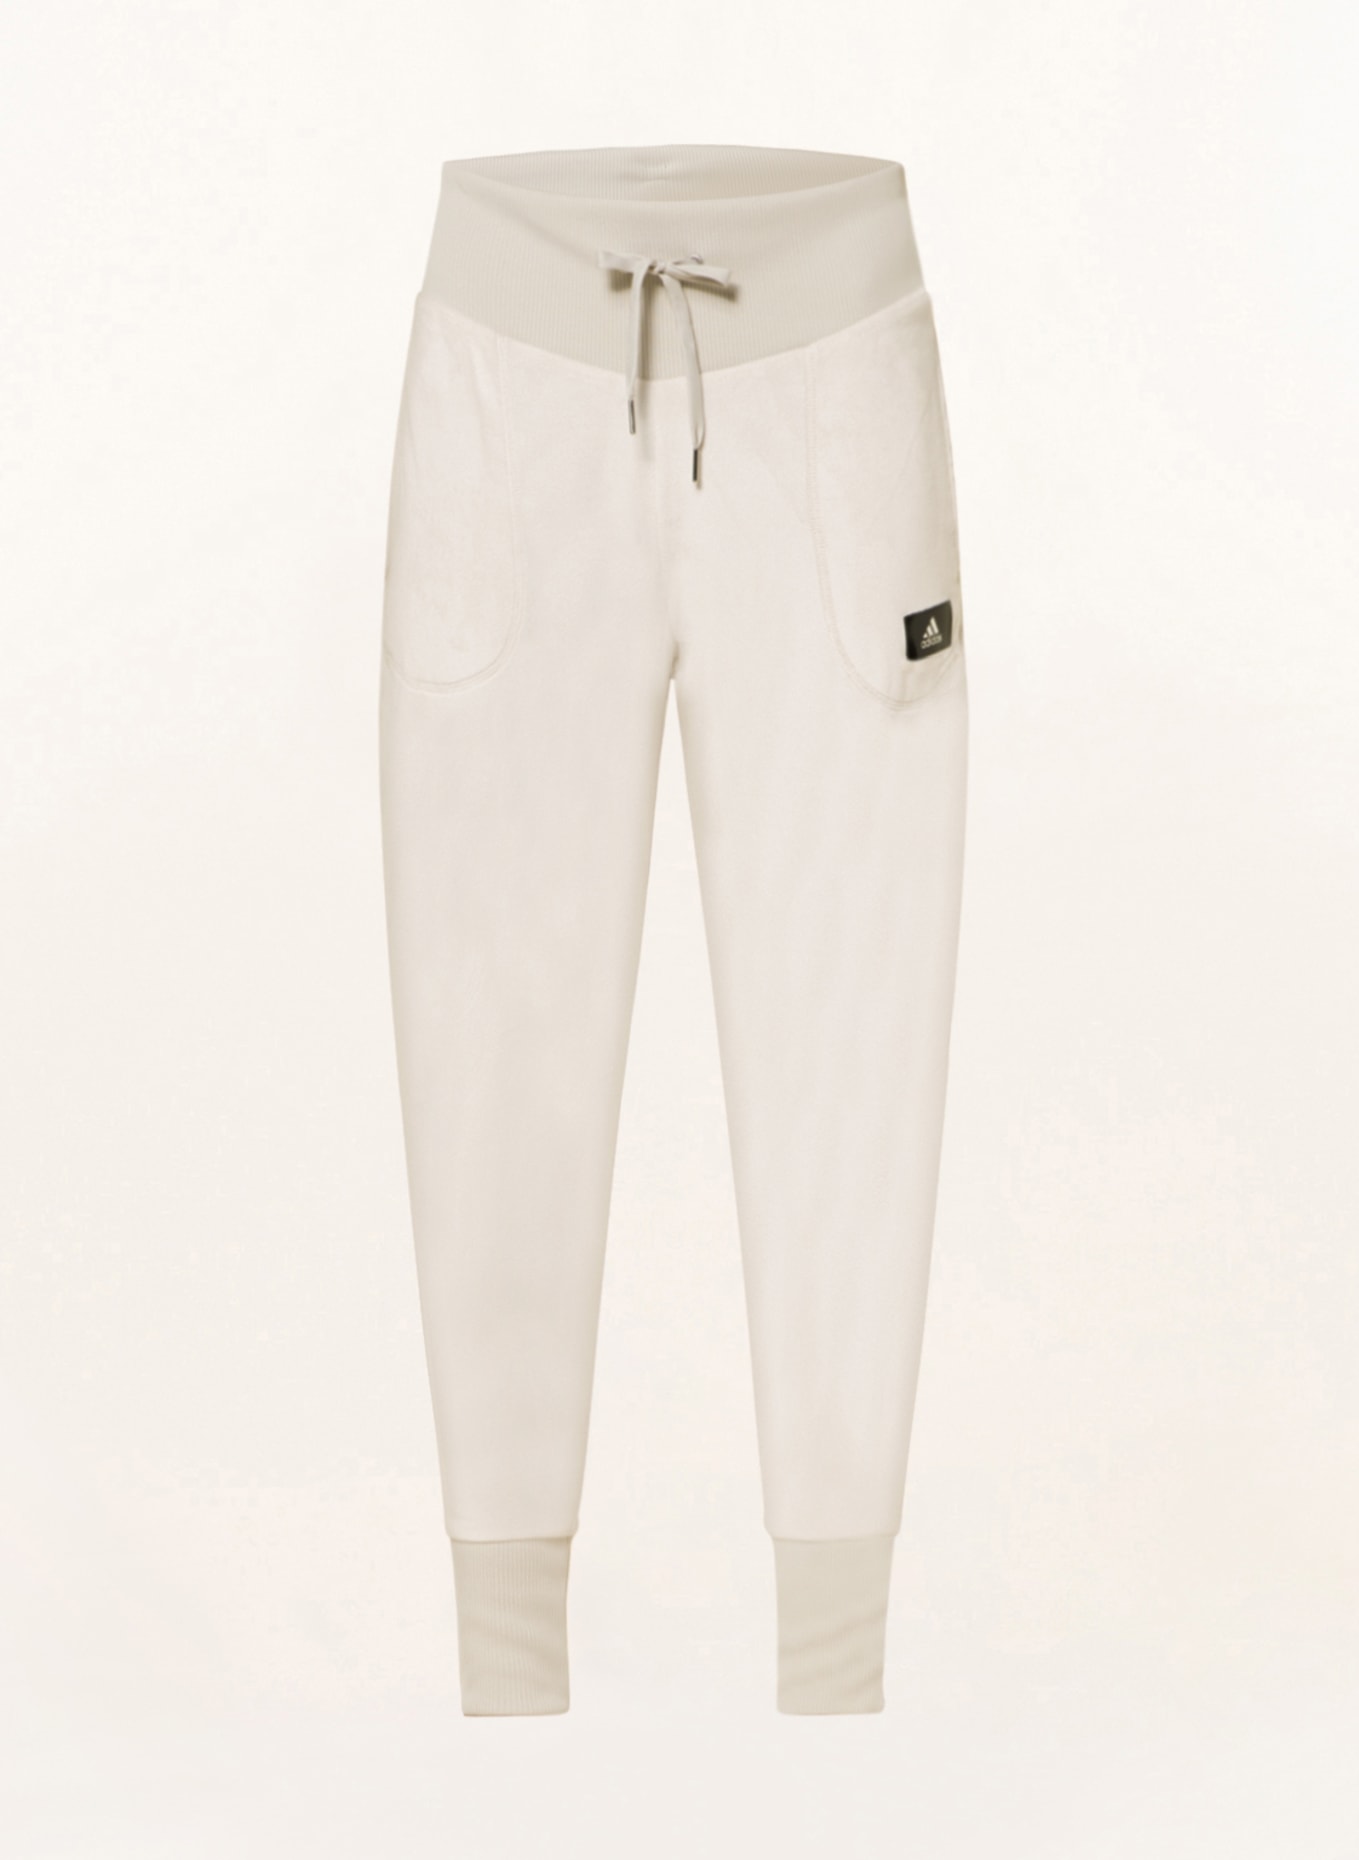 adidas Pants in jogger style, Color: CREAM (Image 1)